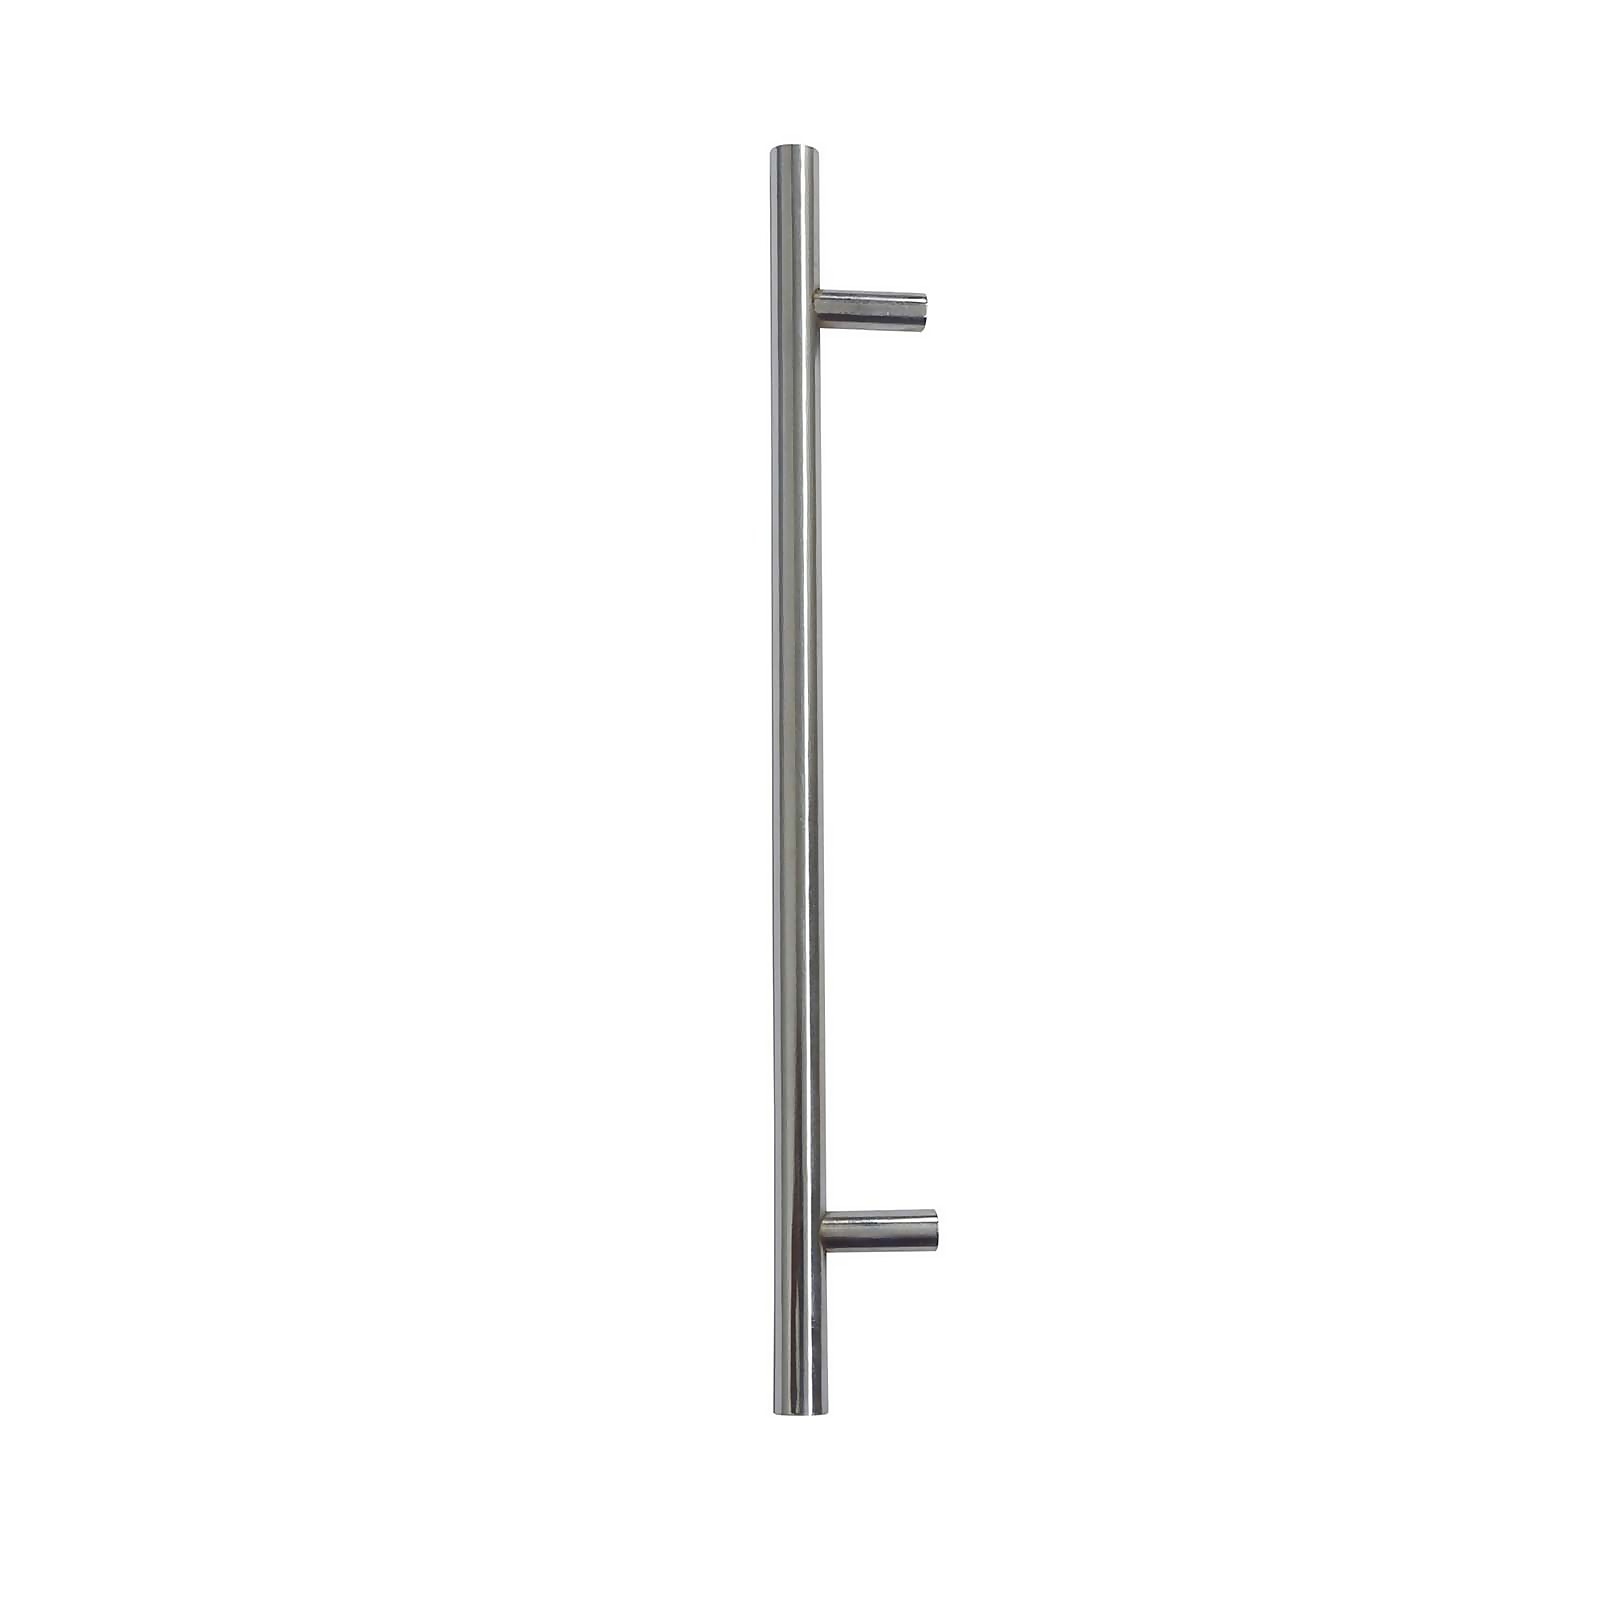 Photo of Lynton 160mm Steel T-bar Chrome Cabinet Handle - 2 Pack